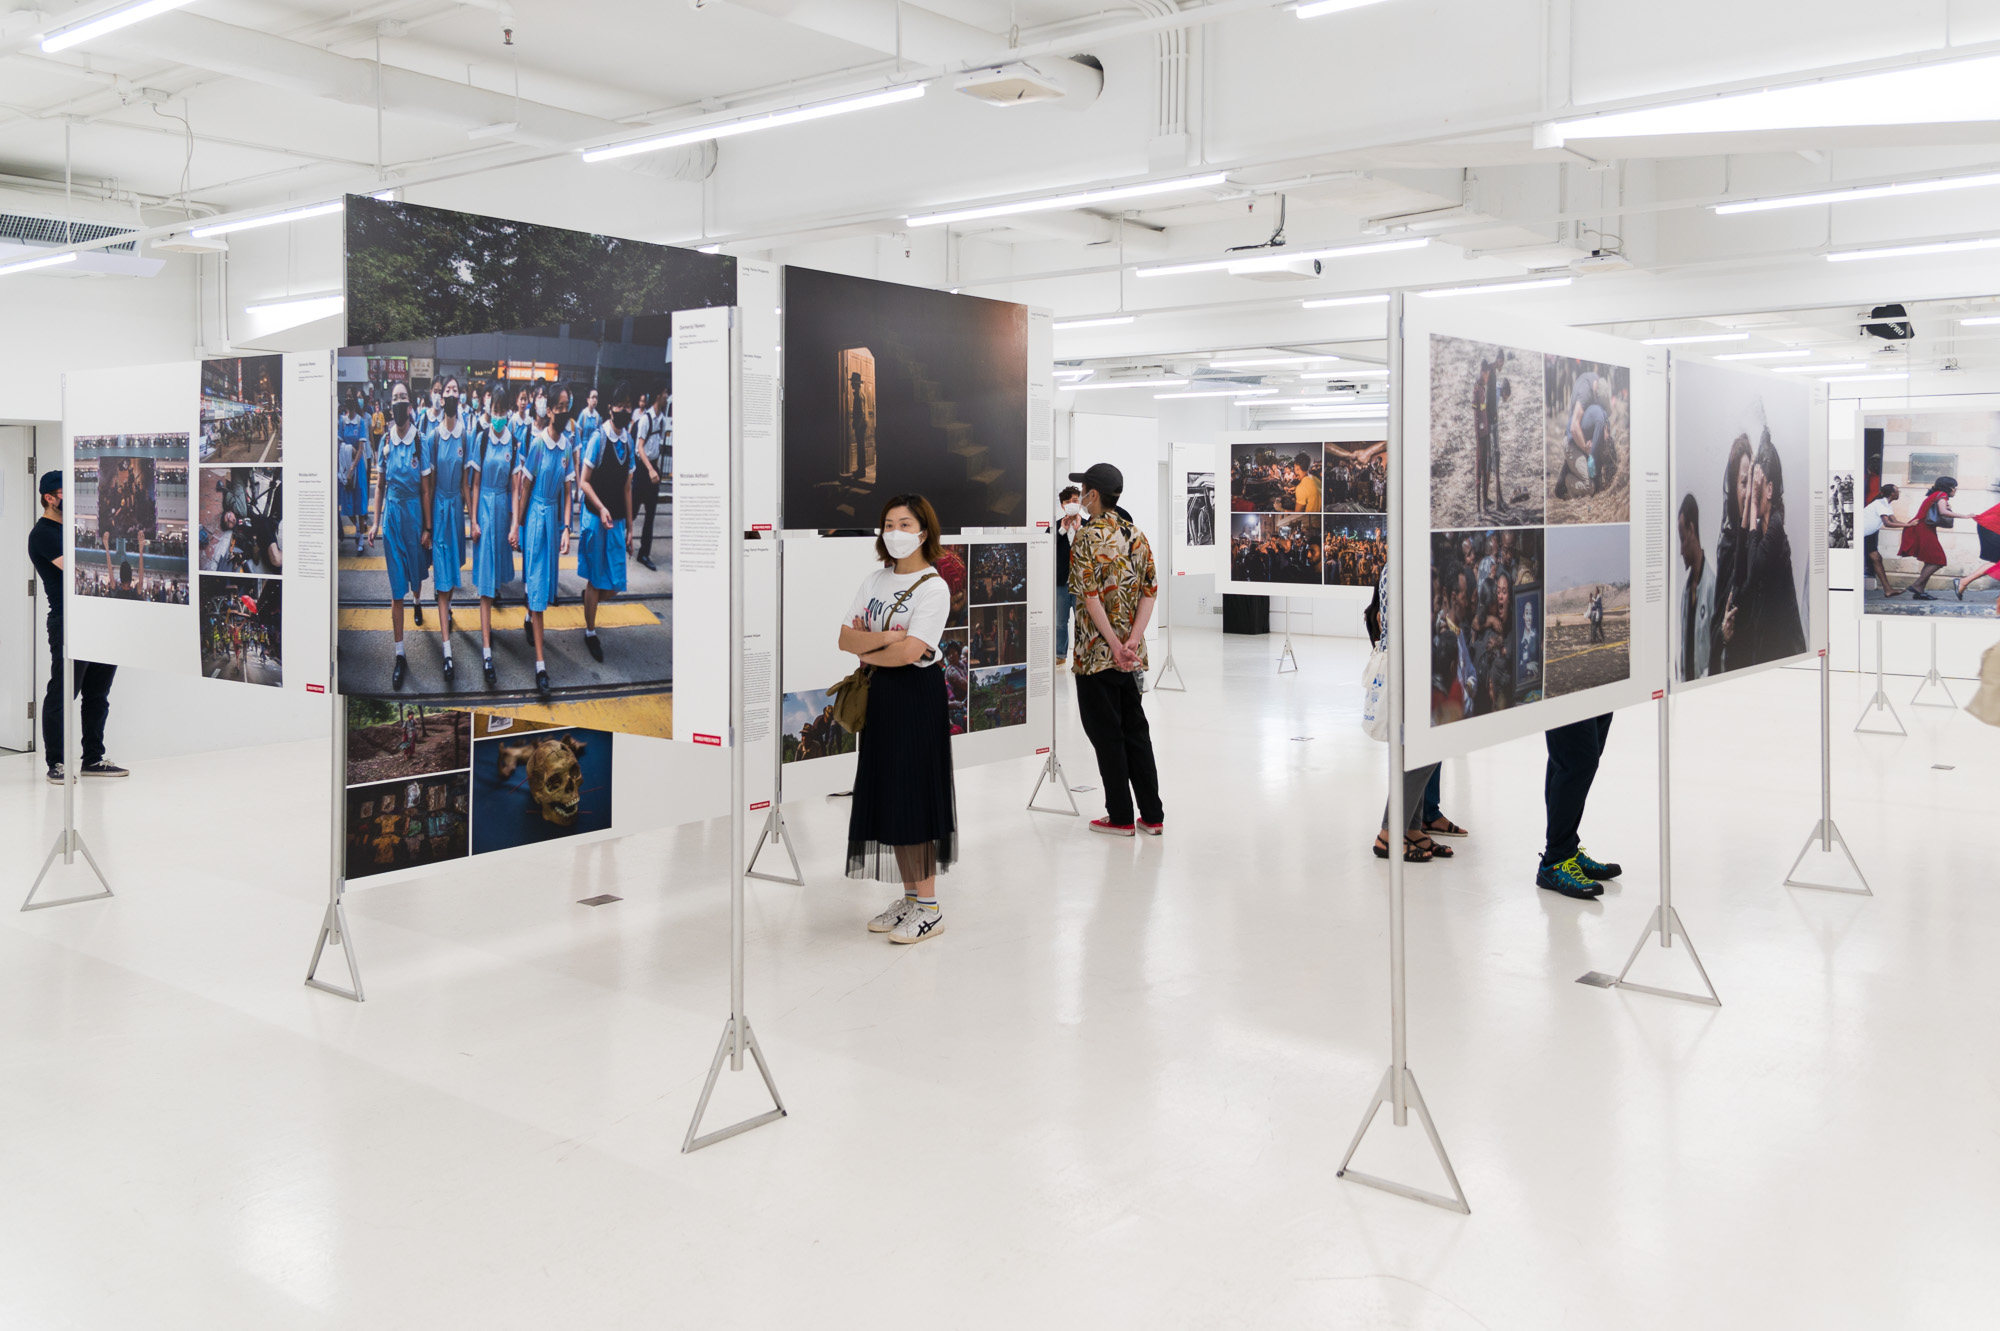 A photo by AFP’s Nicolas Asfouri showing Hong Kong schoolgirls at a protest in 2019 is displayed at the World Press Photo Contest exhibition in Admiralty. Photo: Handout